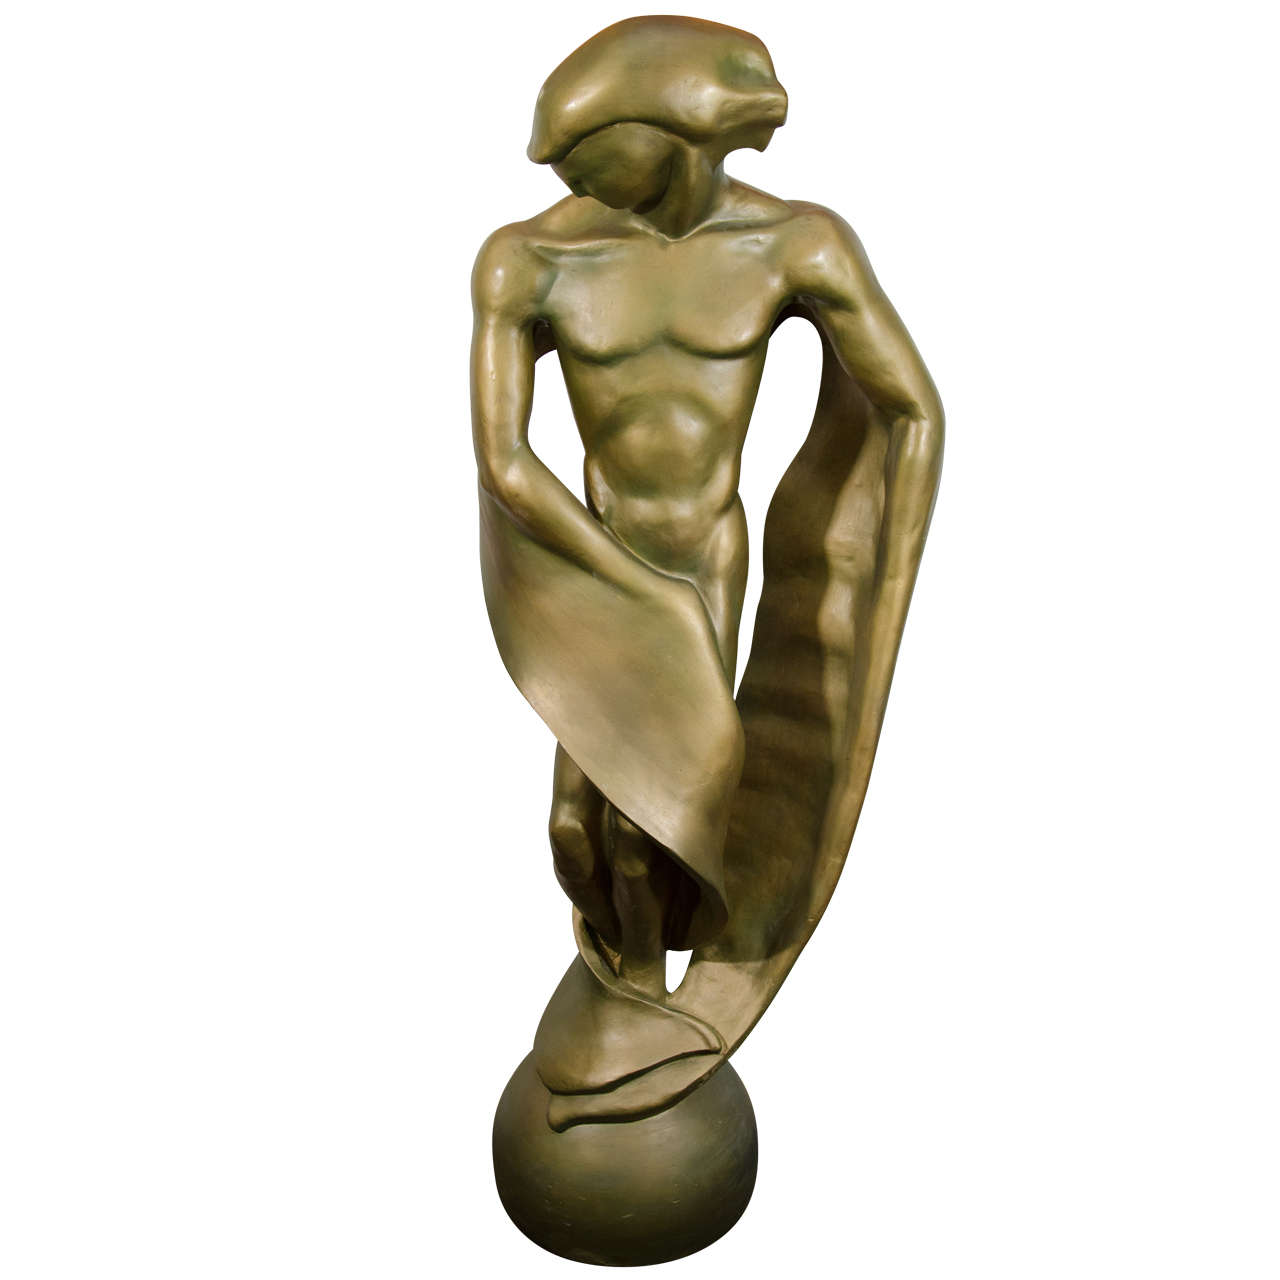 A Midcentury Abstract Figural Statue or Sculpture